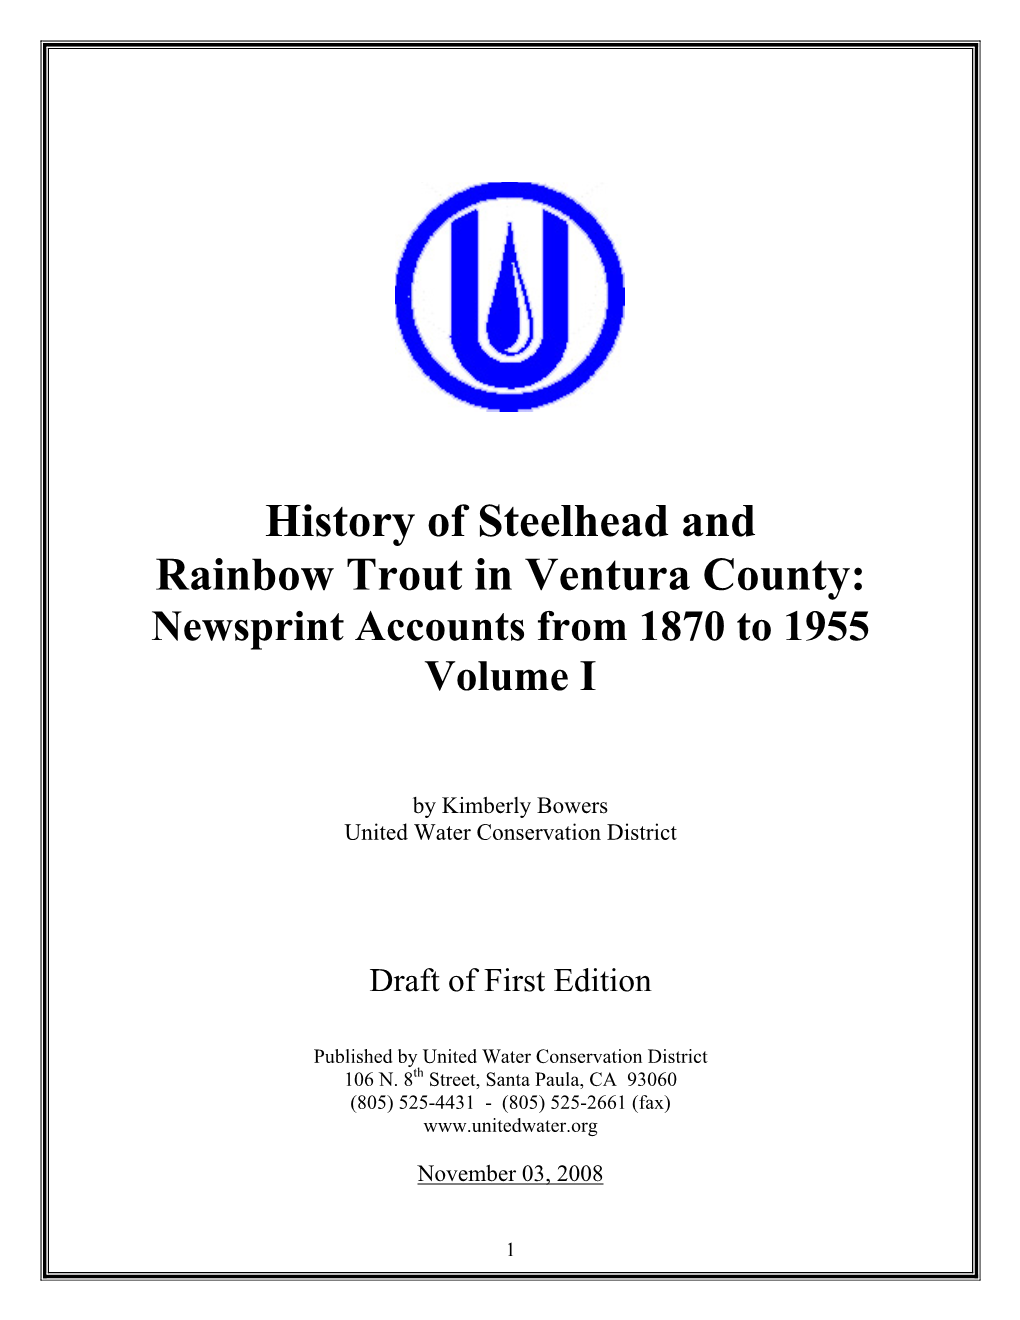 History of Steelhead and Rainbow Trout in Ventura County: Newsprint Accounts from 1870 to 1955 Volume I